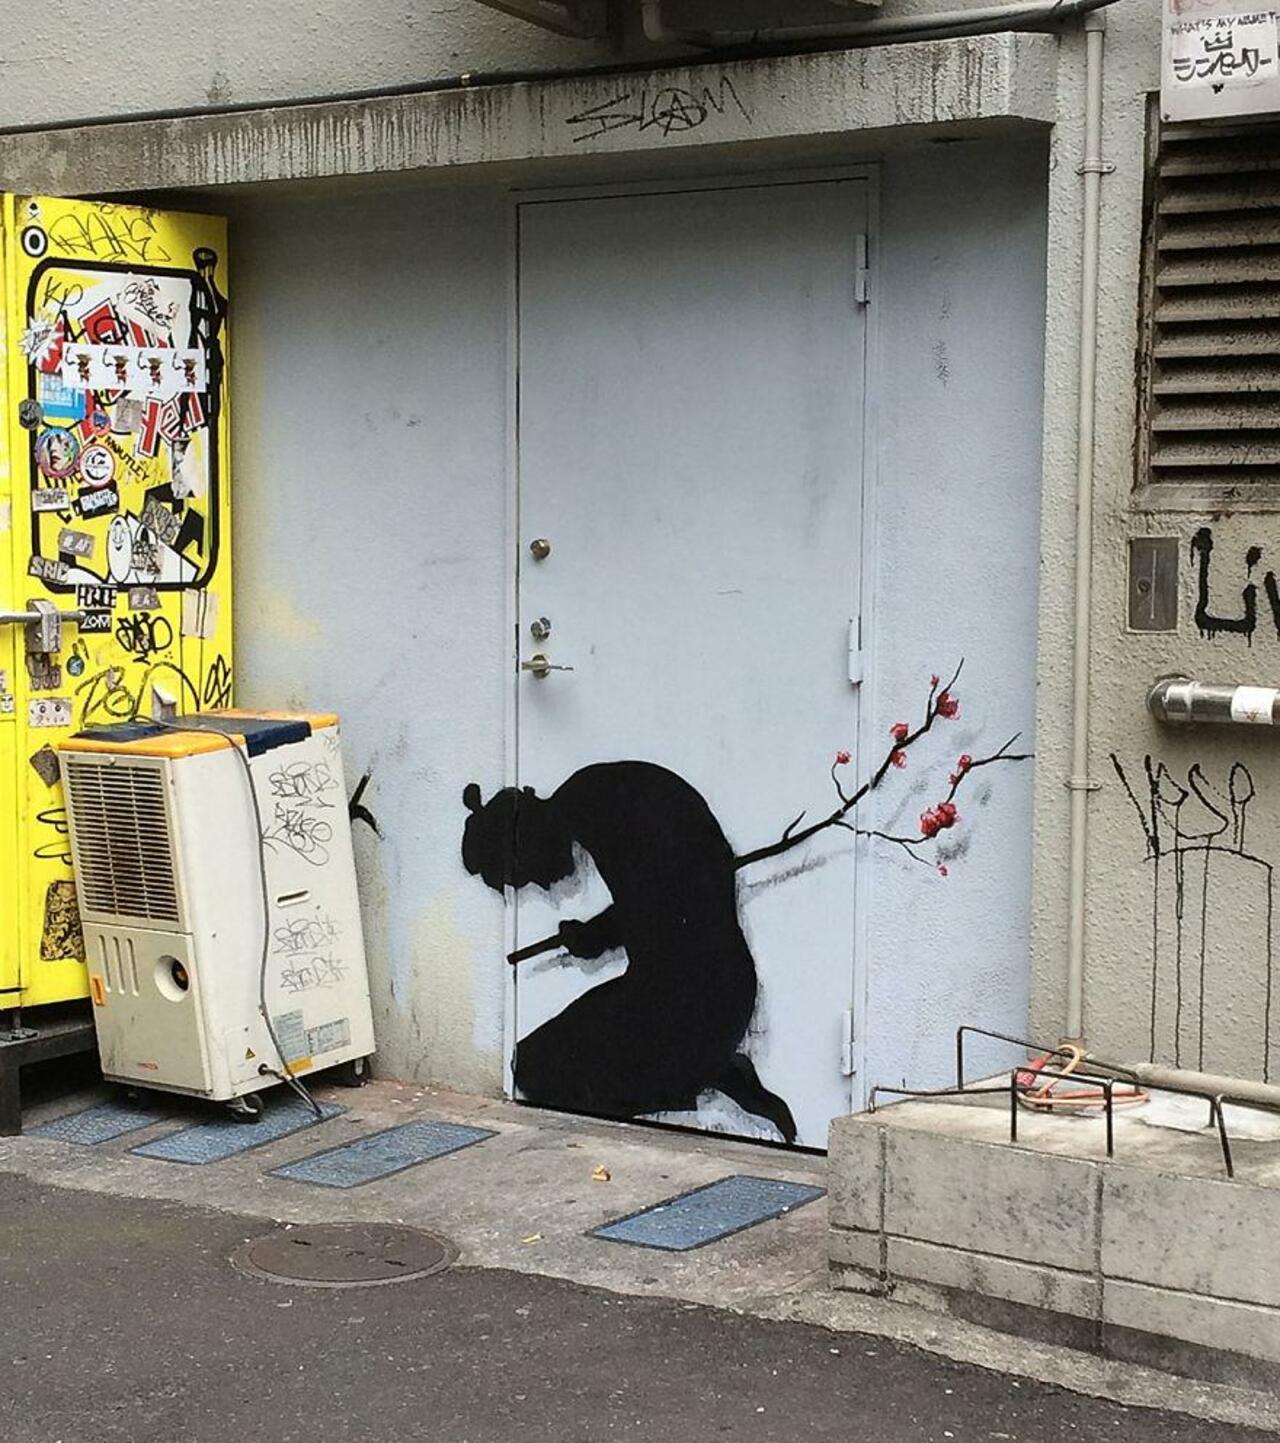 Thought-provoking image of the day. #tpiotd #art #streetart #graffiti #Japan #reflection #life #death http://t.co/0UI2XxdsxX